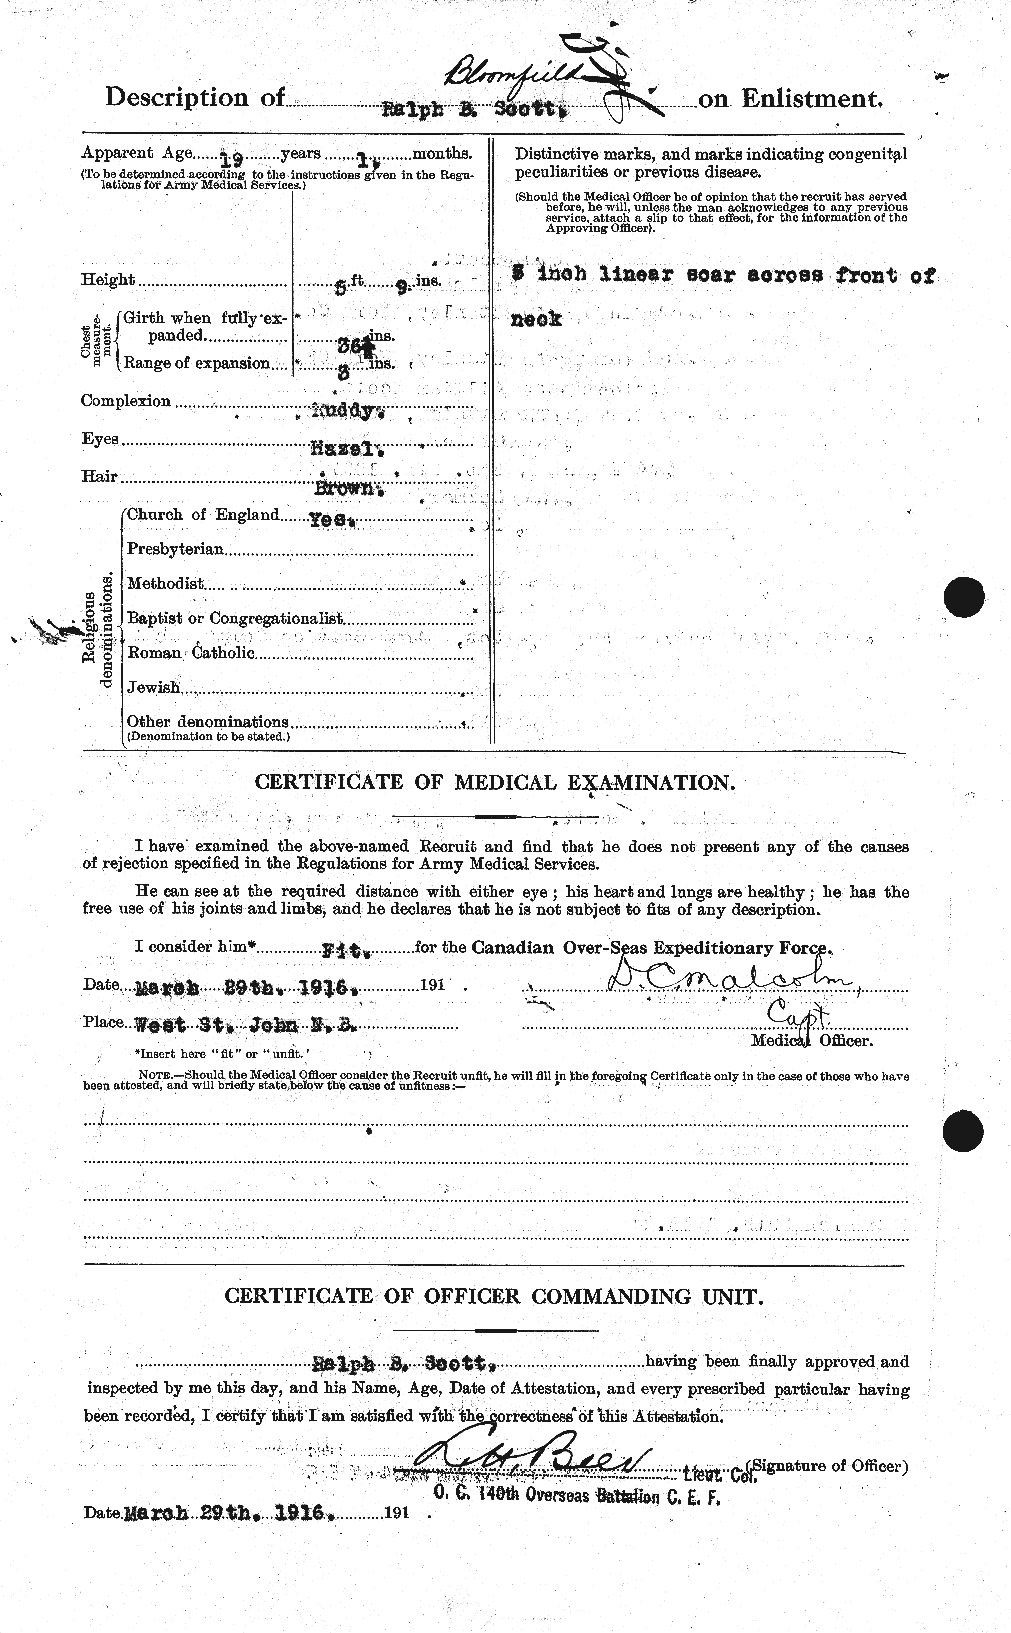 Personnel Records of the First World War - CEF 090207b